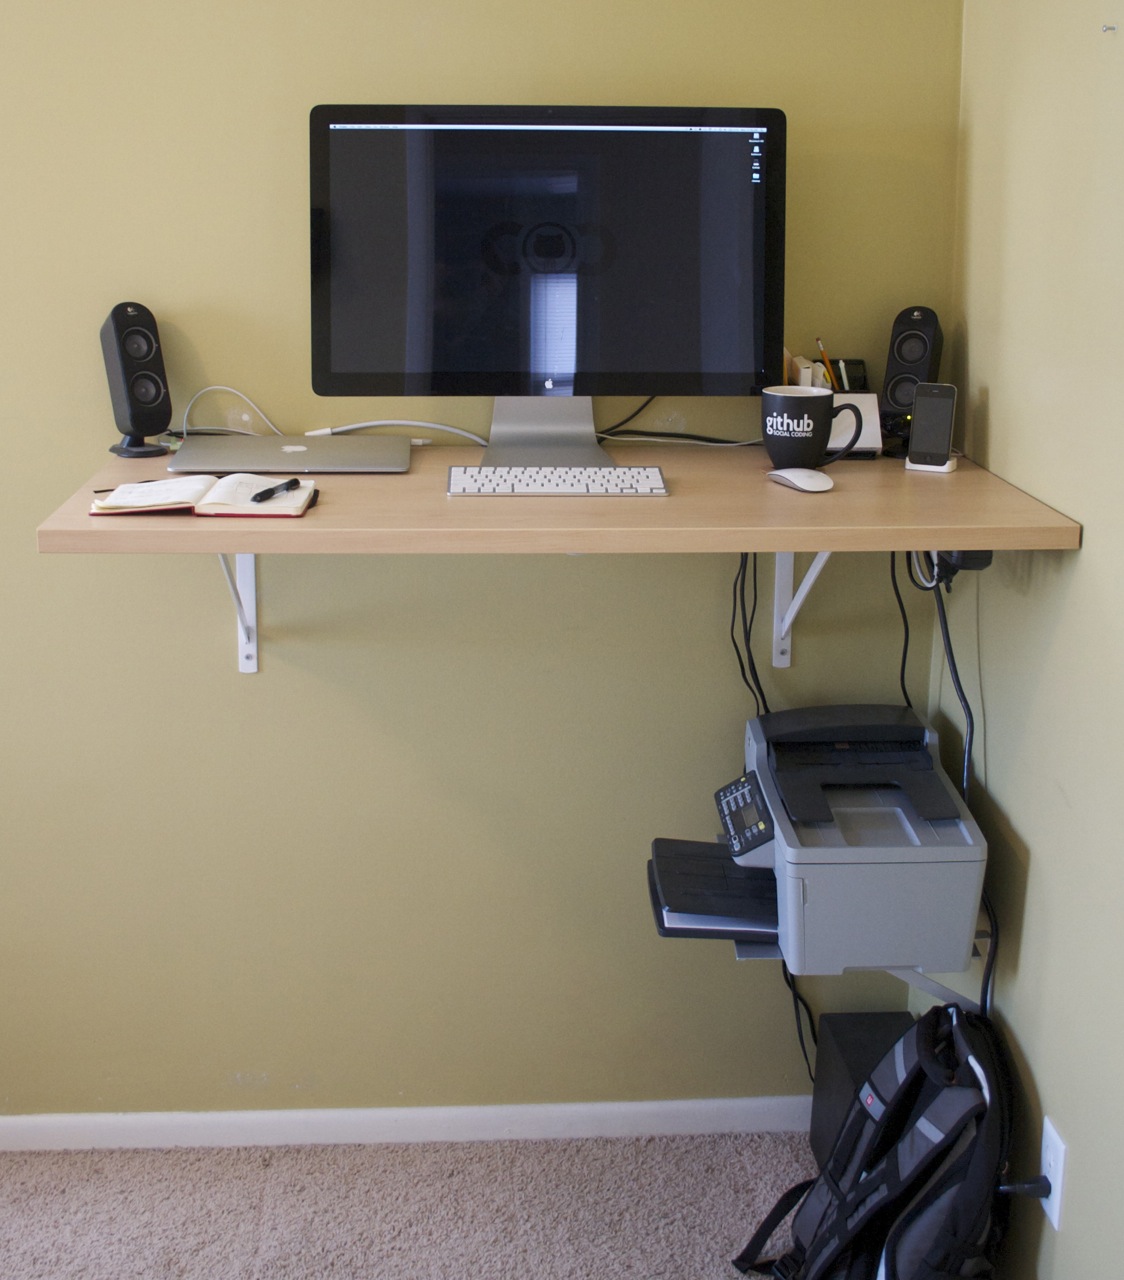 The finished standing desk